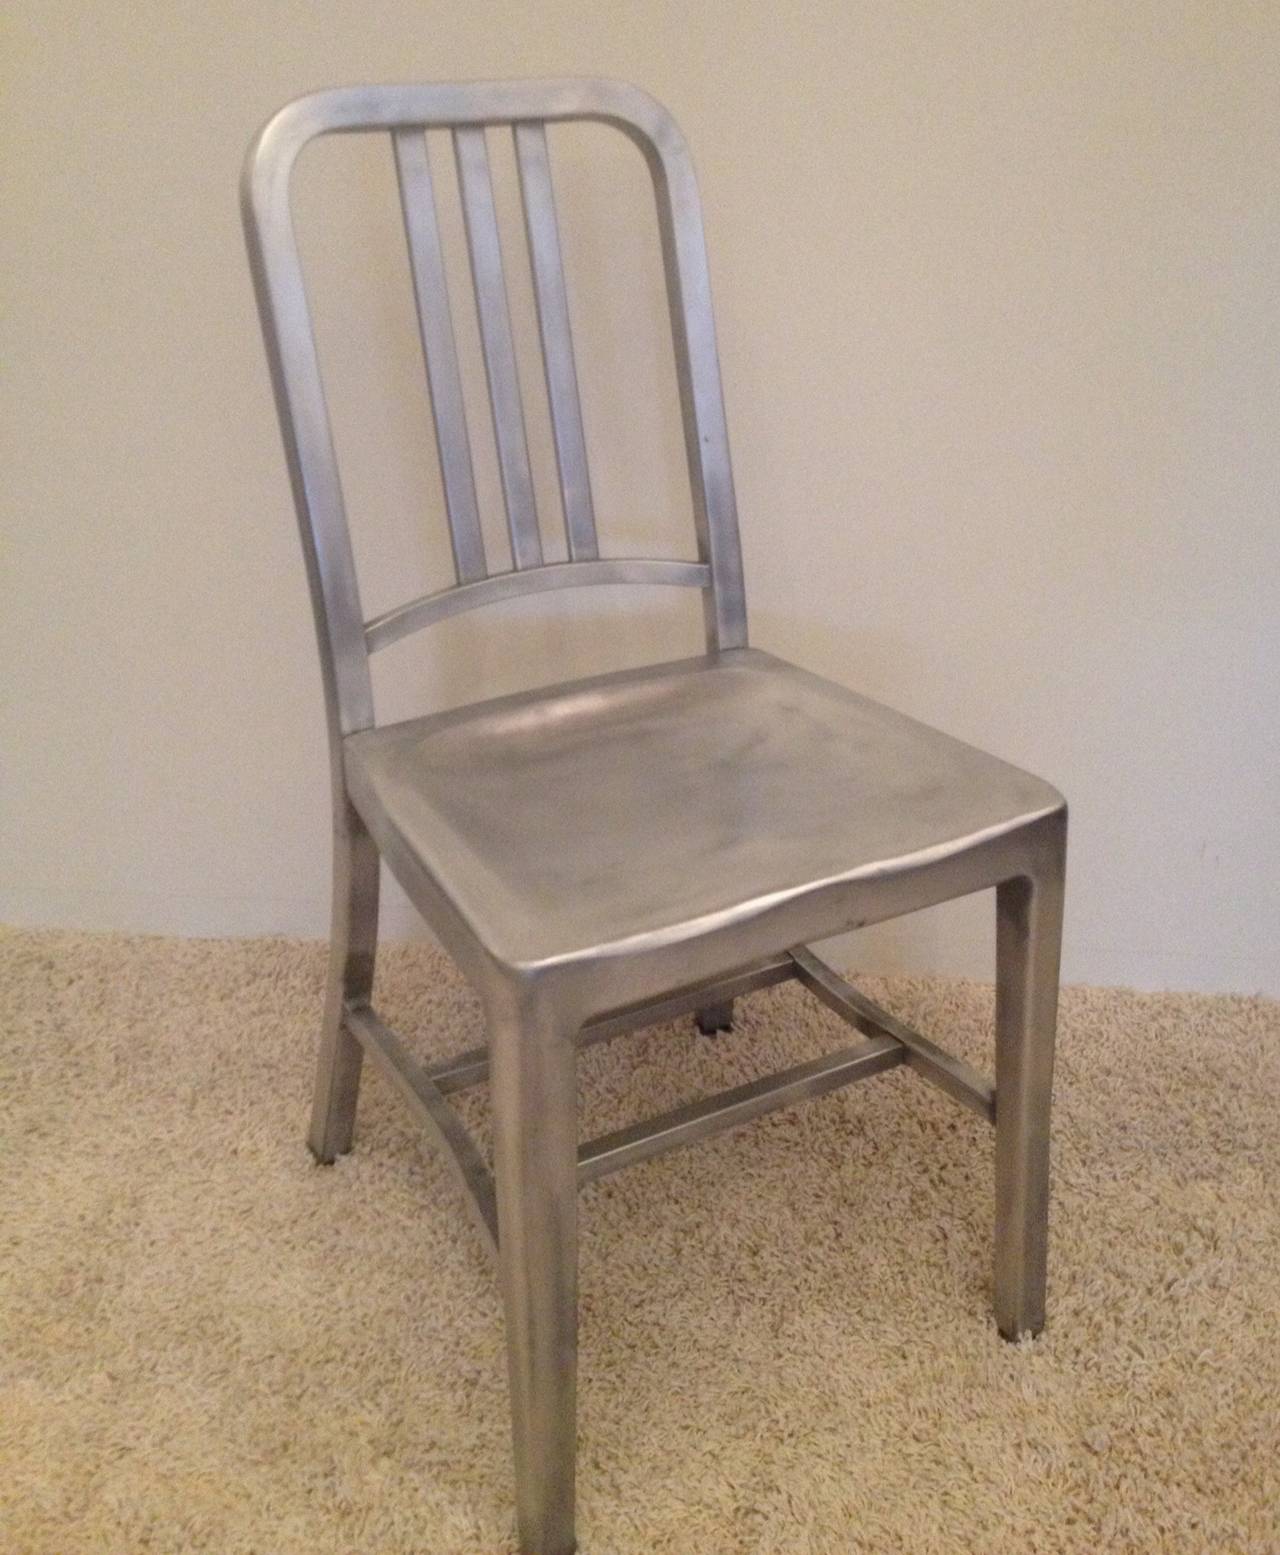 Emeco aluminum Navy chairs set of four, in very fine condition with original lables.